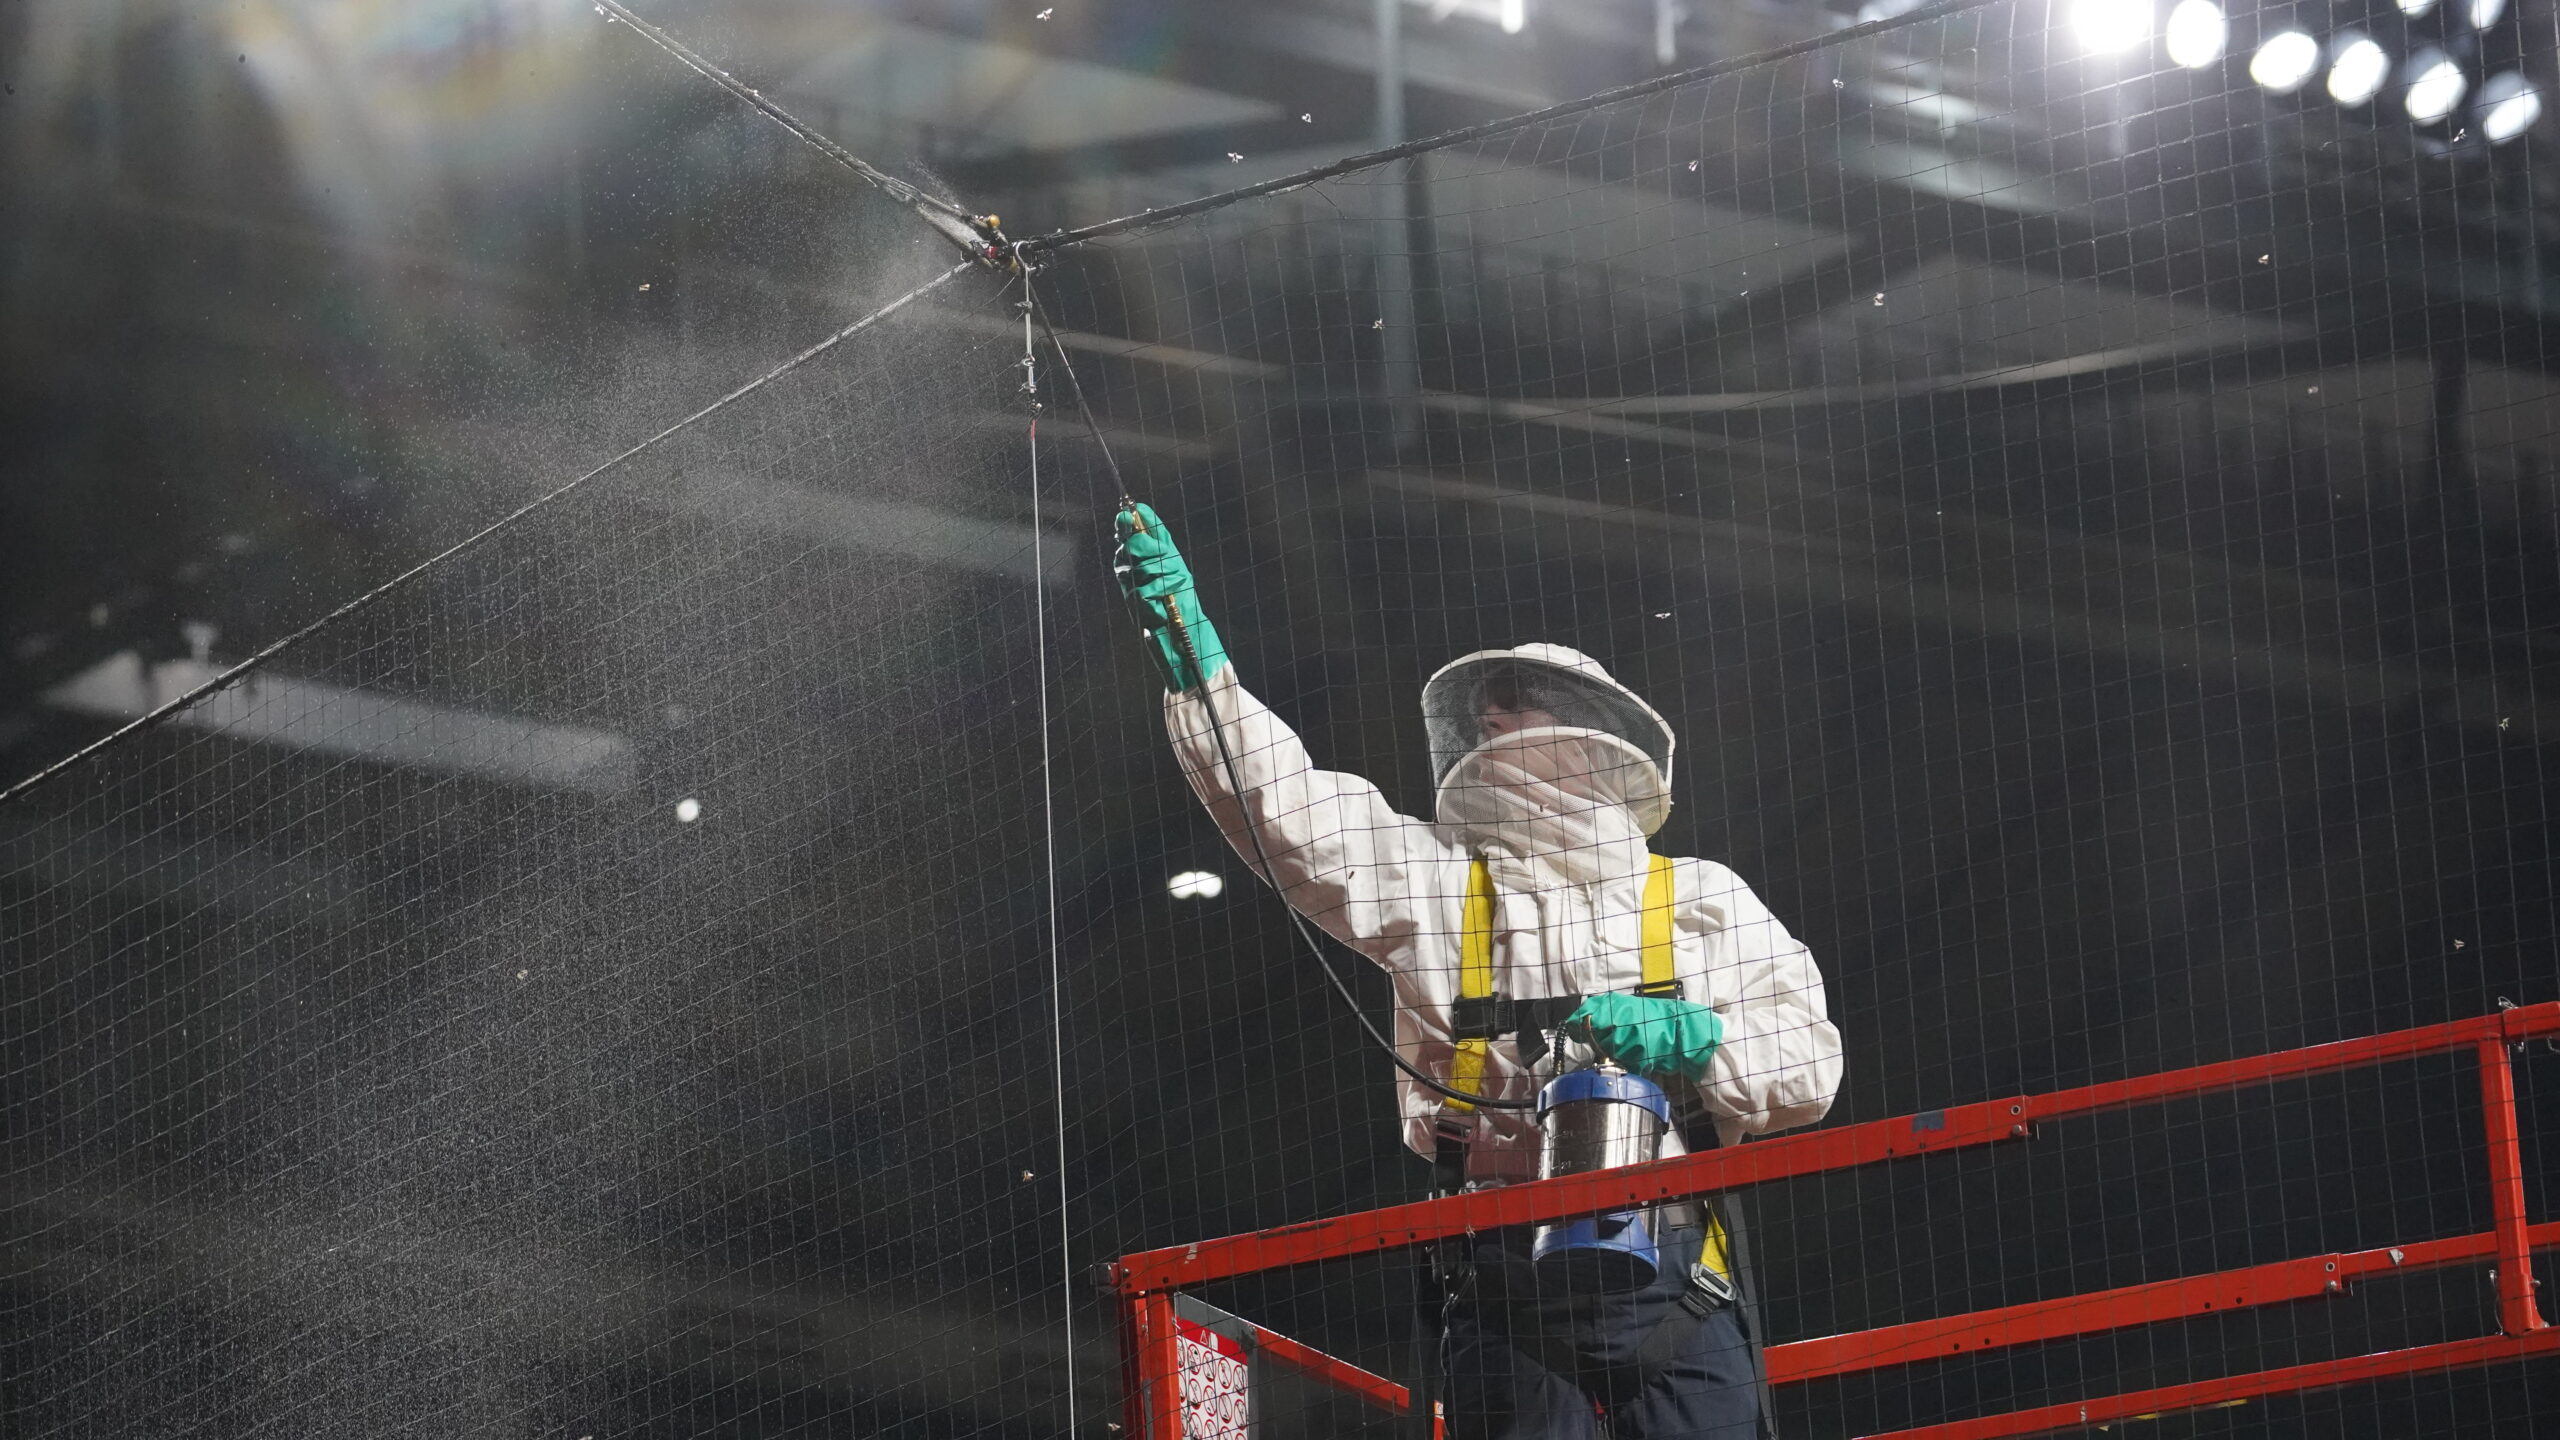 Beekeeper clearing the bees at Chase Field D-backs-Dodgers game....